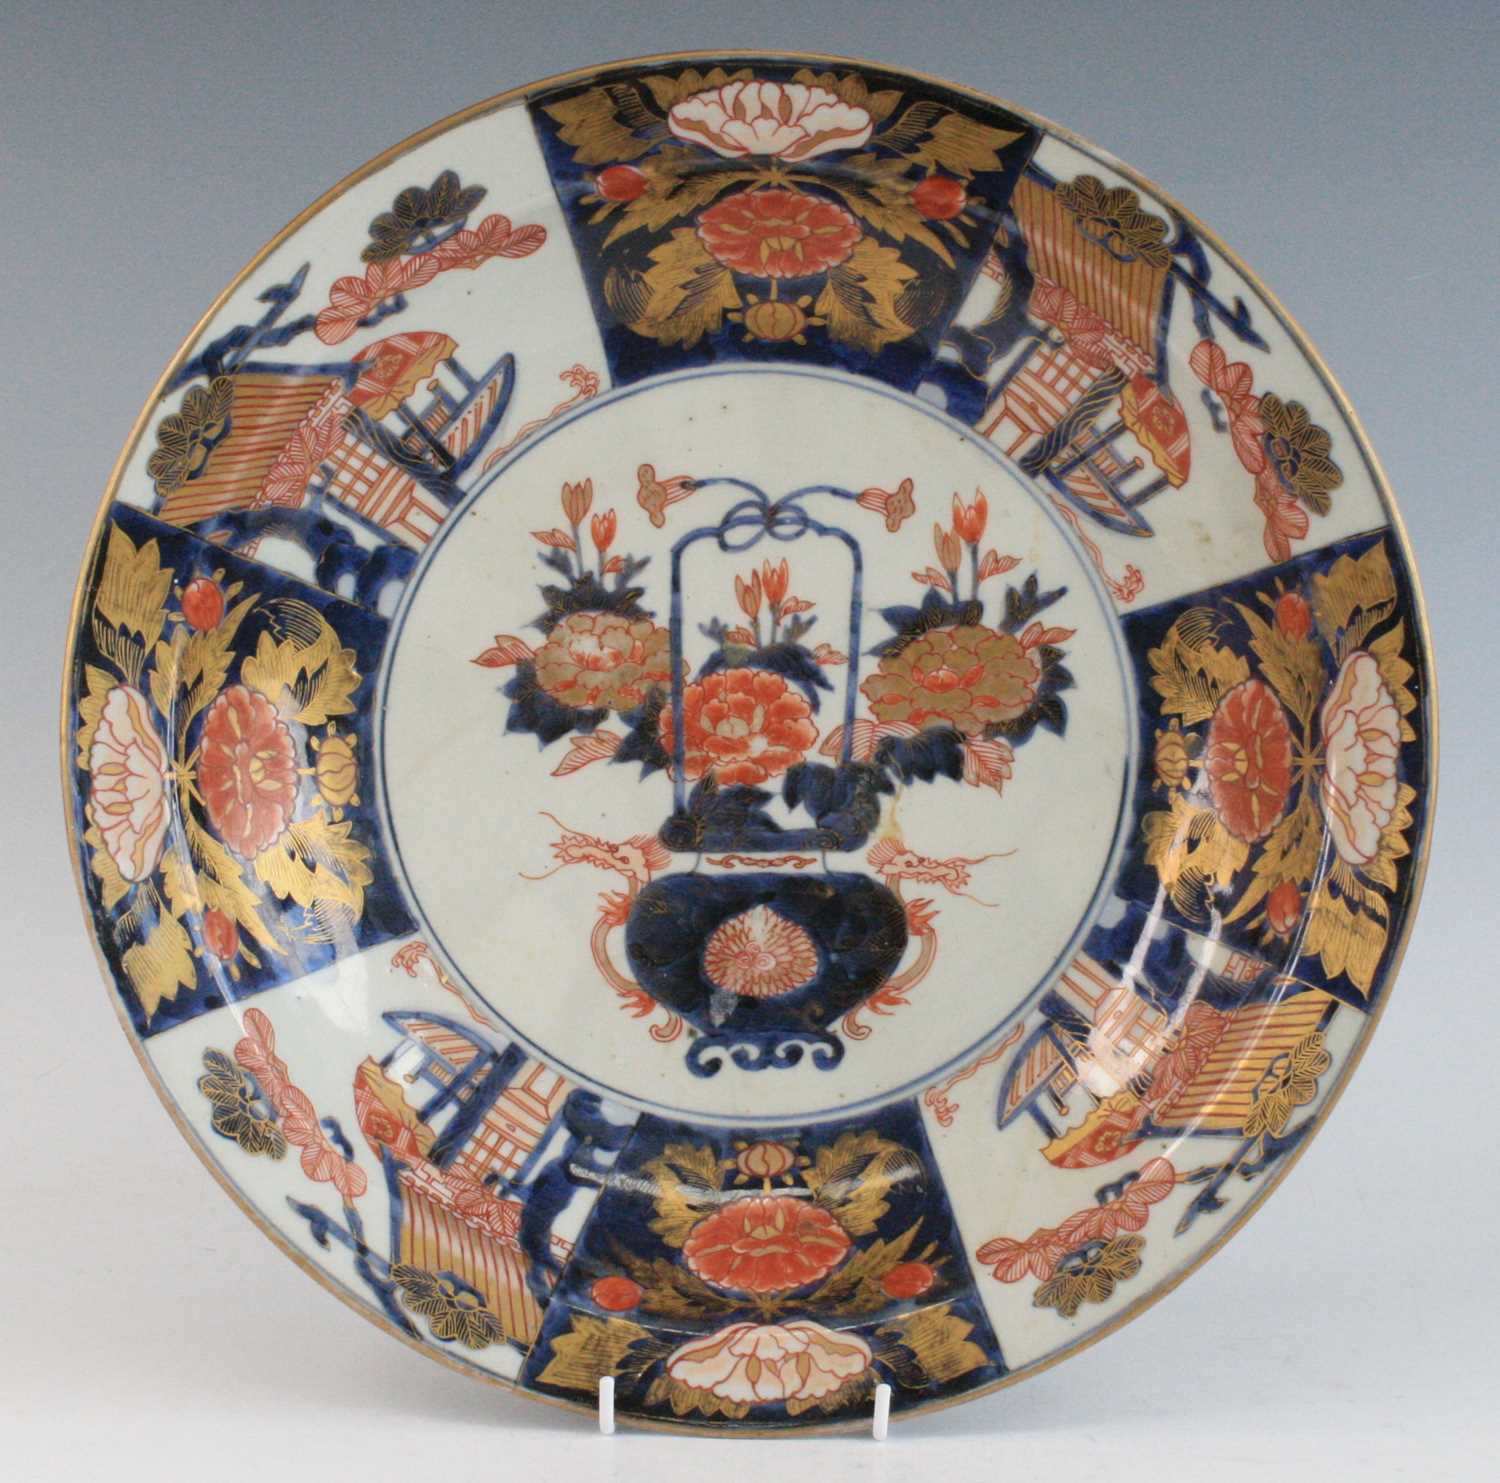 A Japanese Imari porcelain charger, 18th century, decorated with a basket of flowers within a border